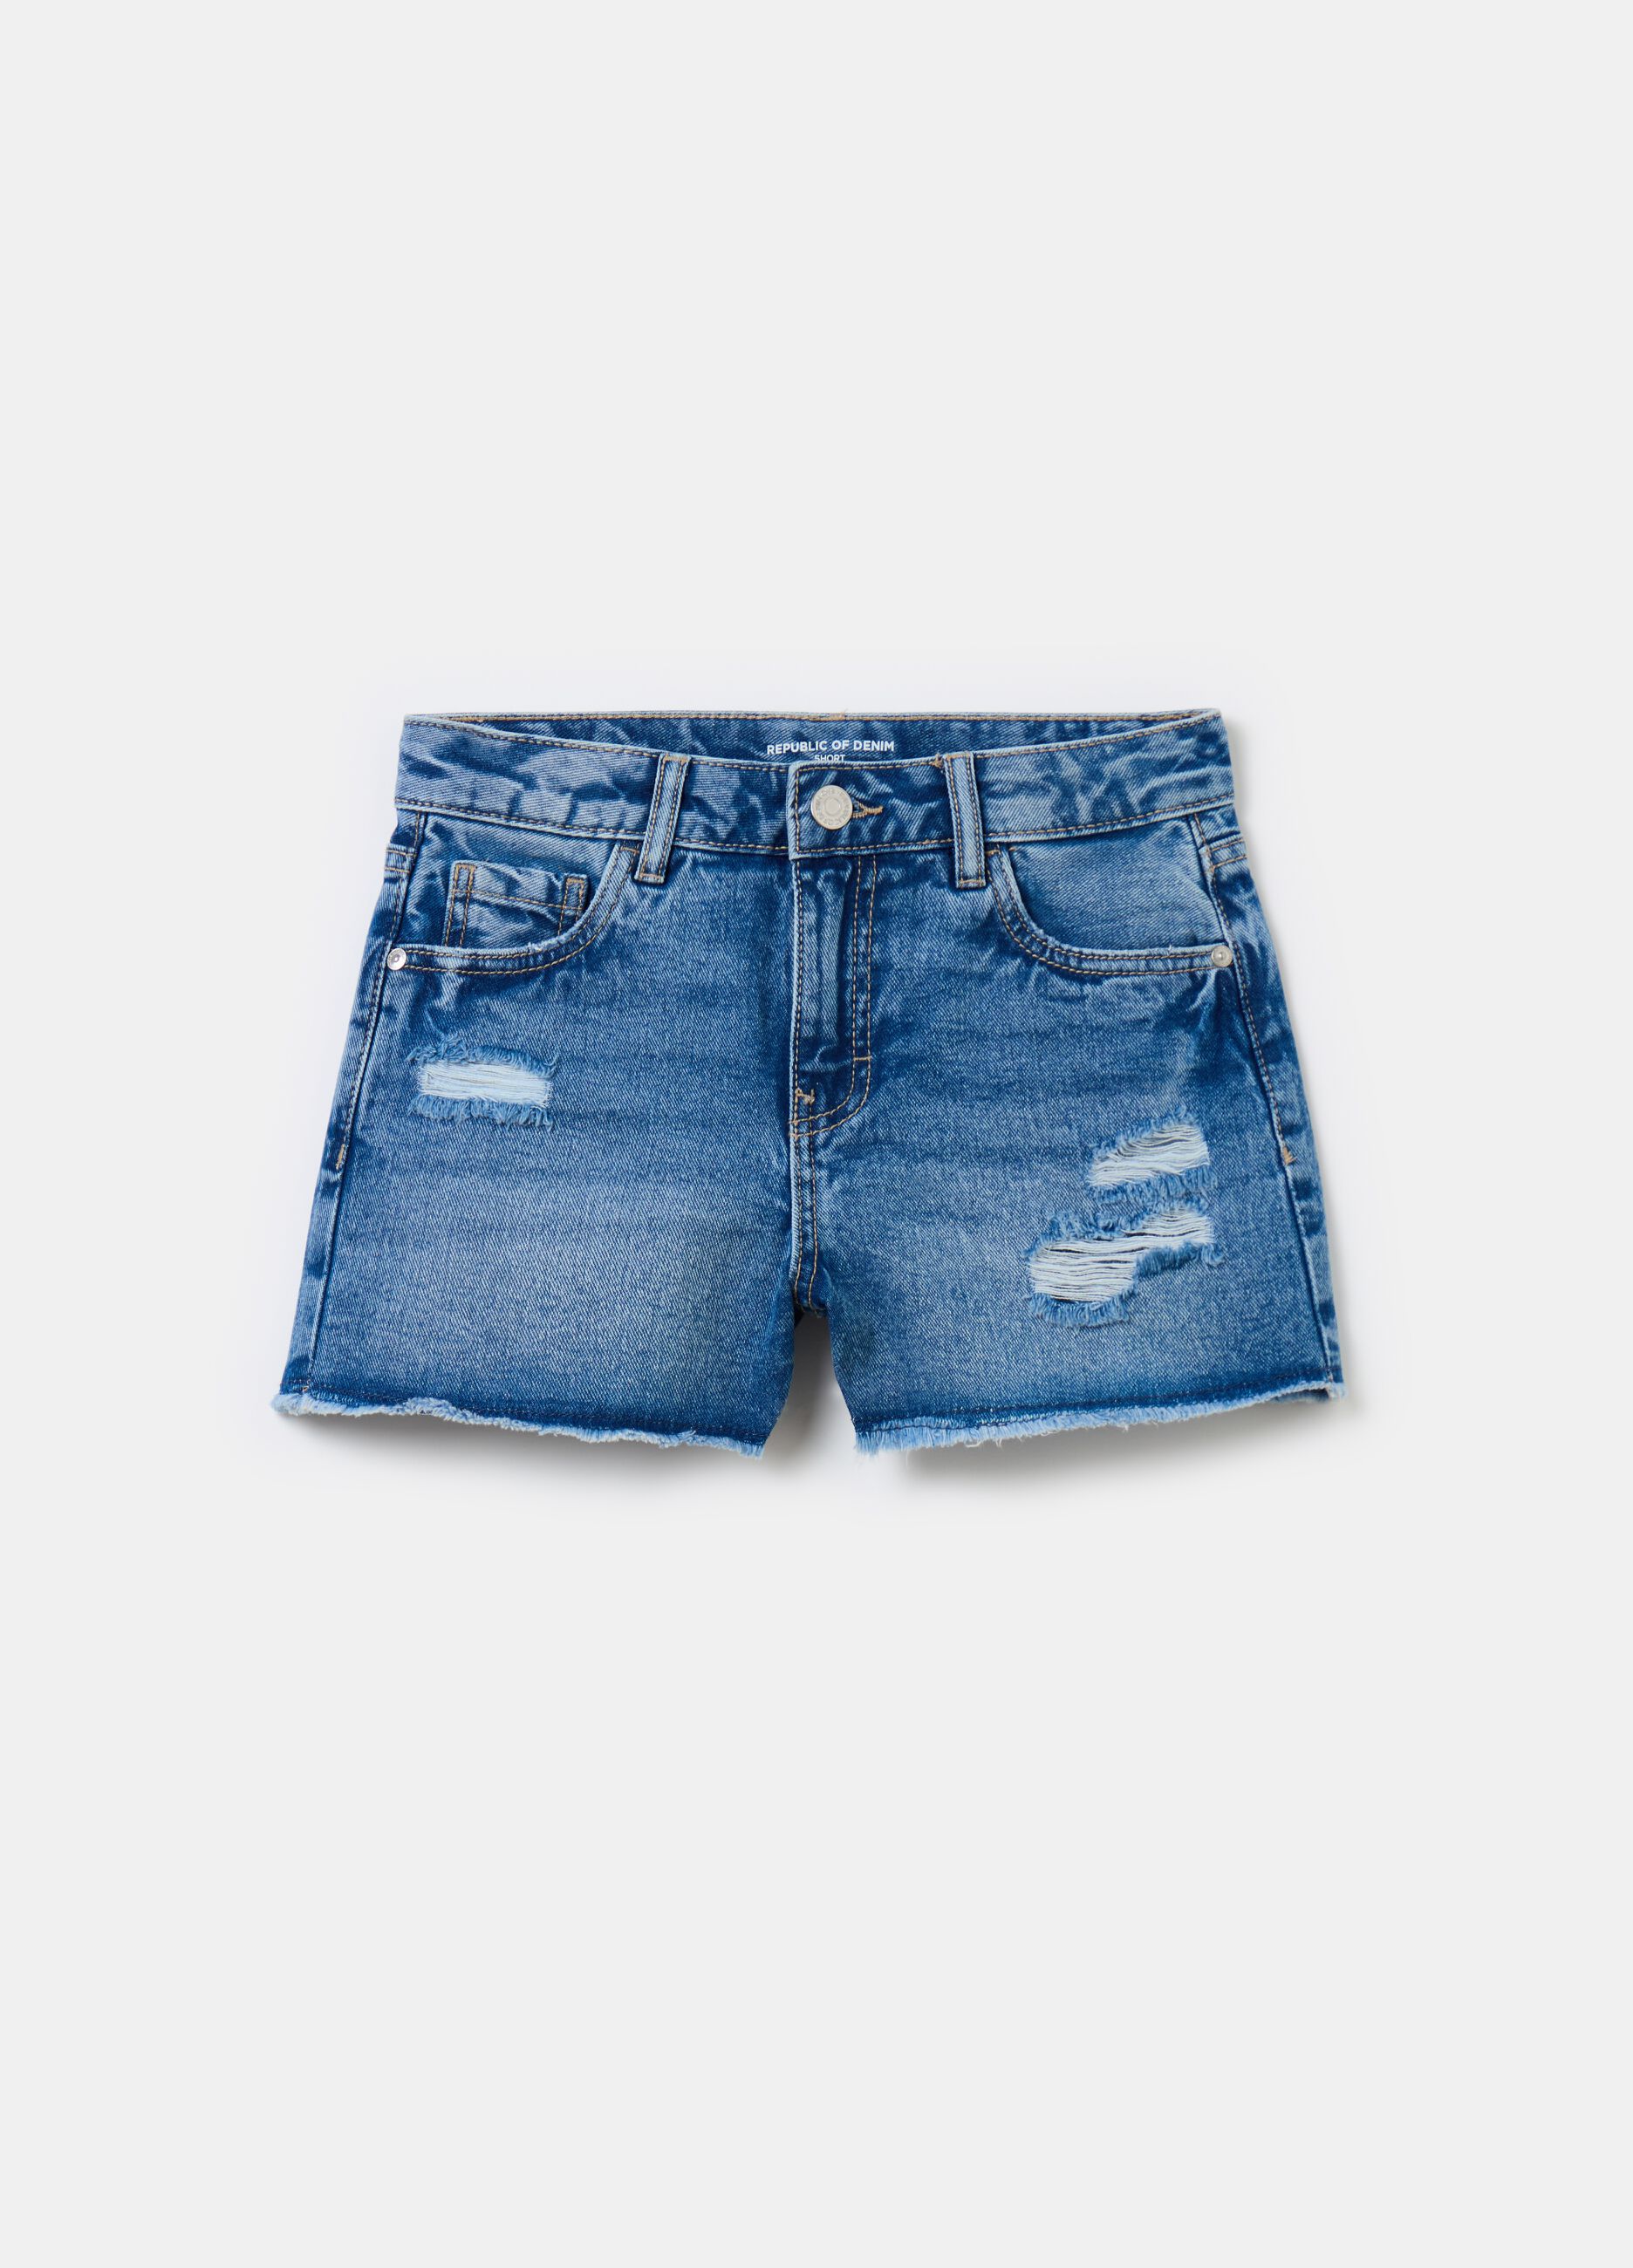 Denim shorts with abrasions